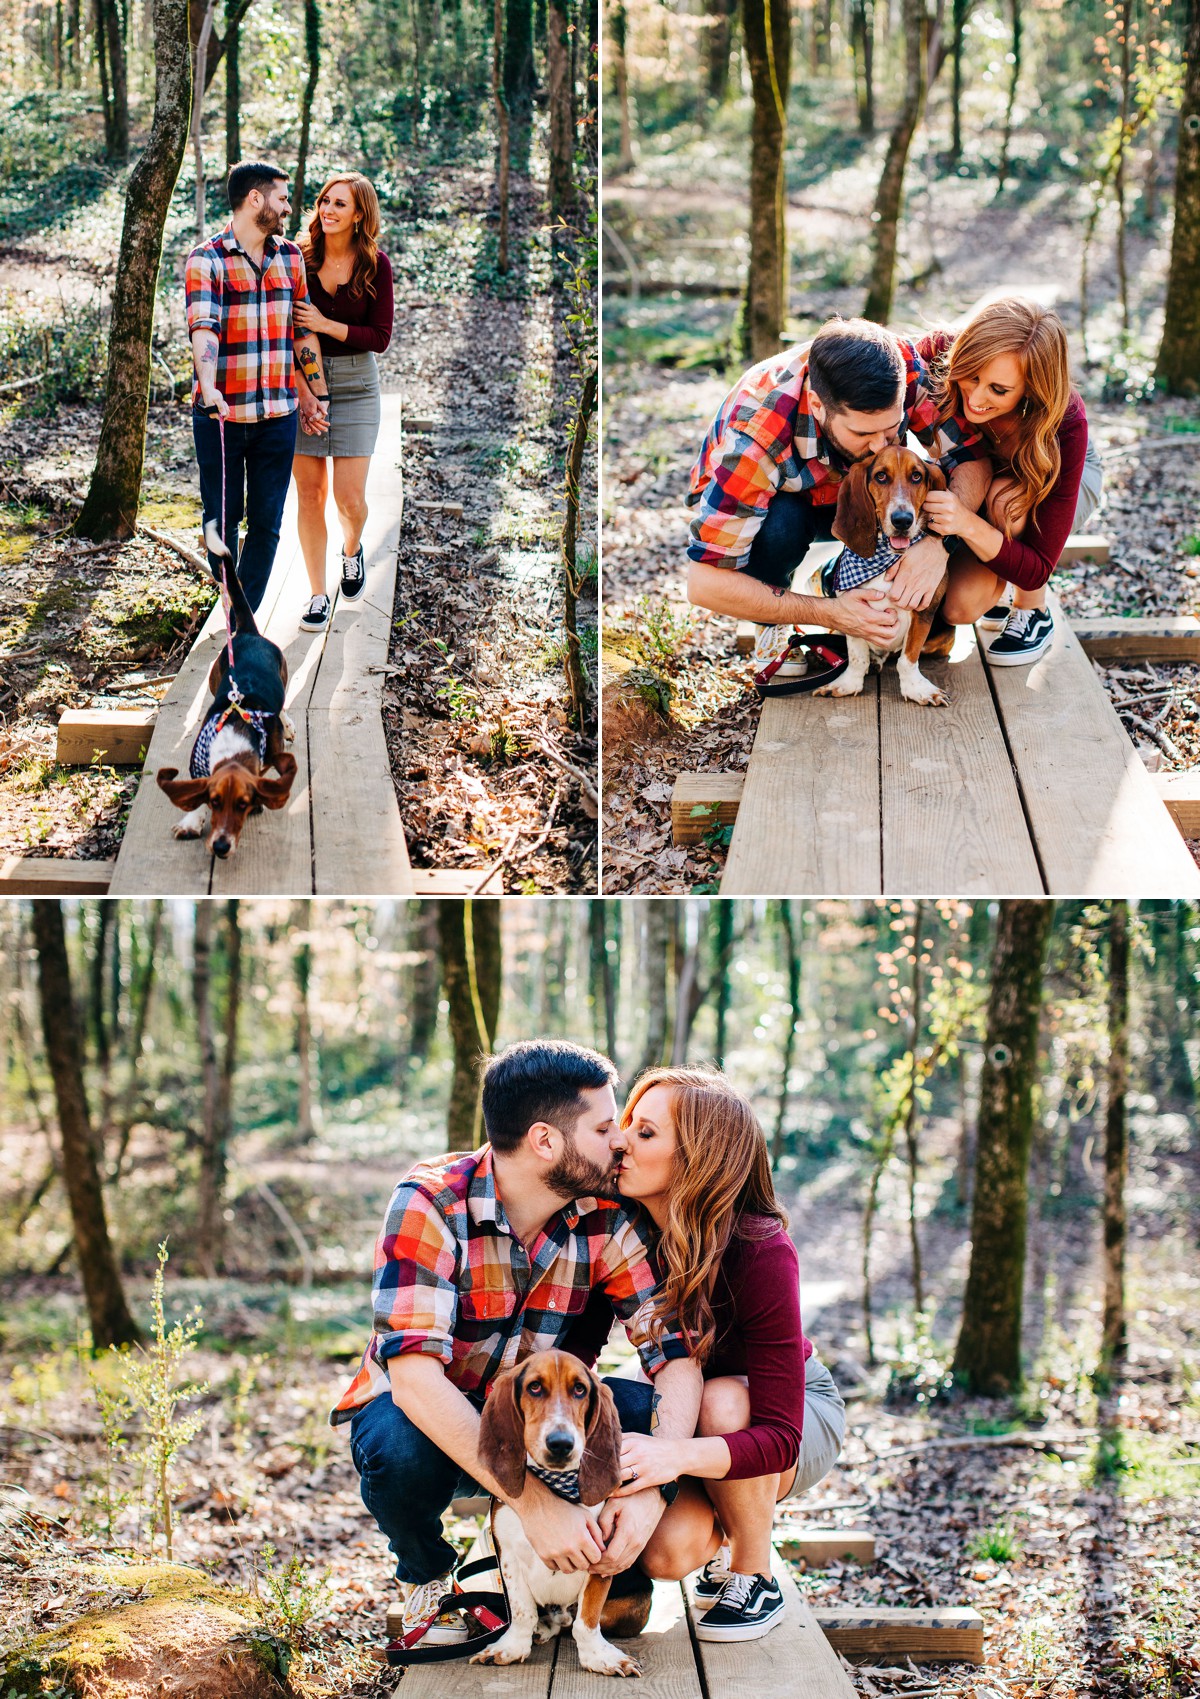 Wilderness Engagement Session, Wild Forest, North Carolina Forest Photos, NC Engagement Photographer, Couple with dog photos, basset hound